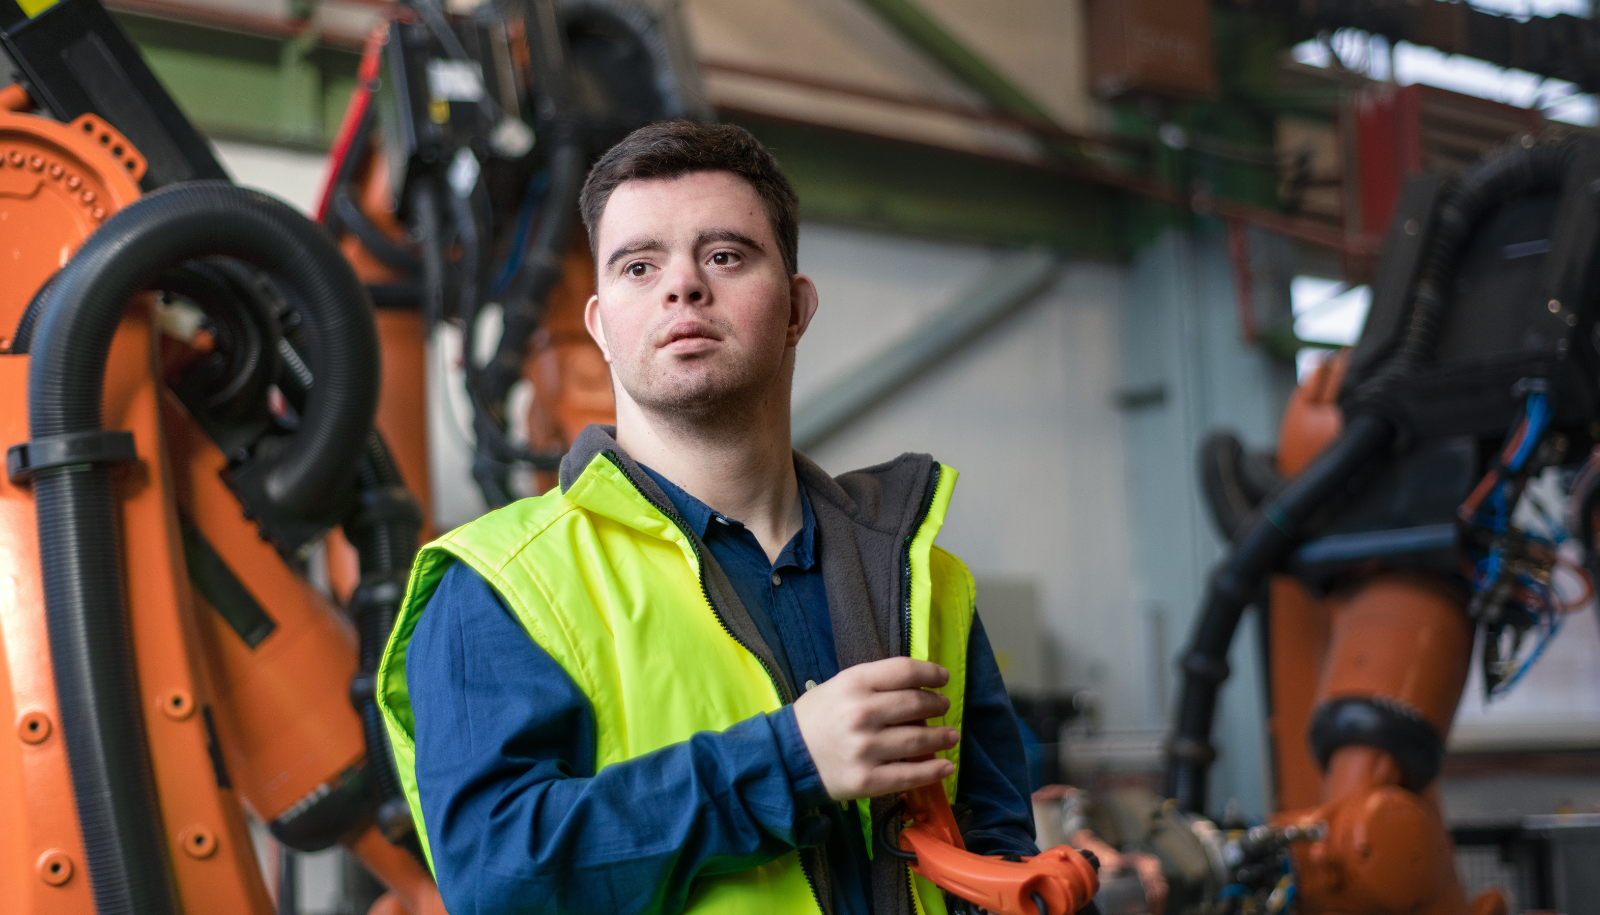 a young man wearing high-vis clothing working in a factory surrounded by machinery